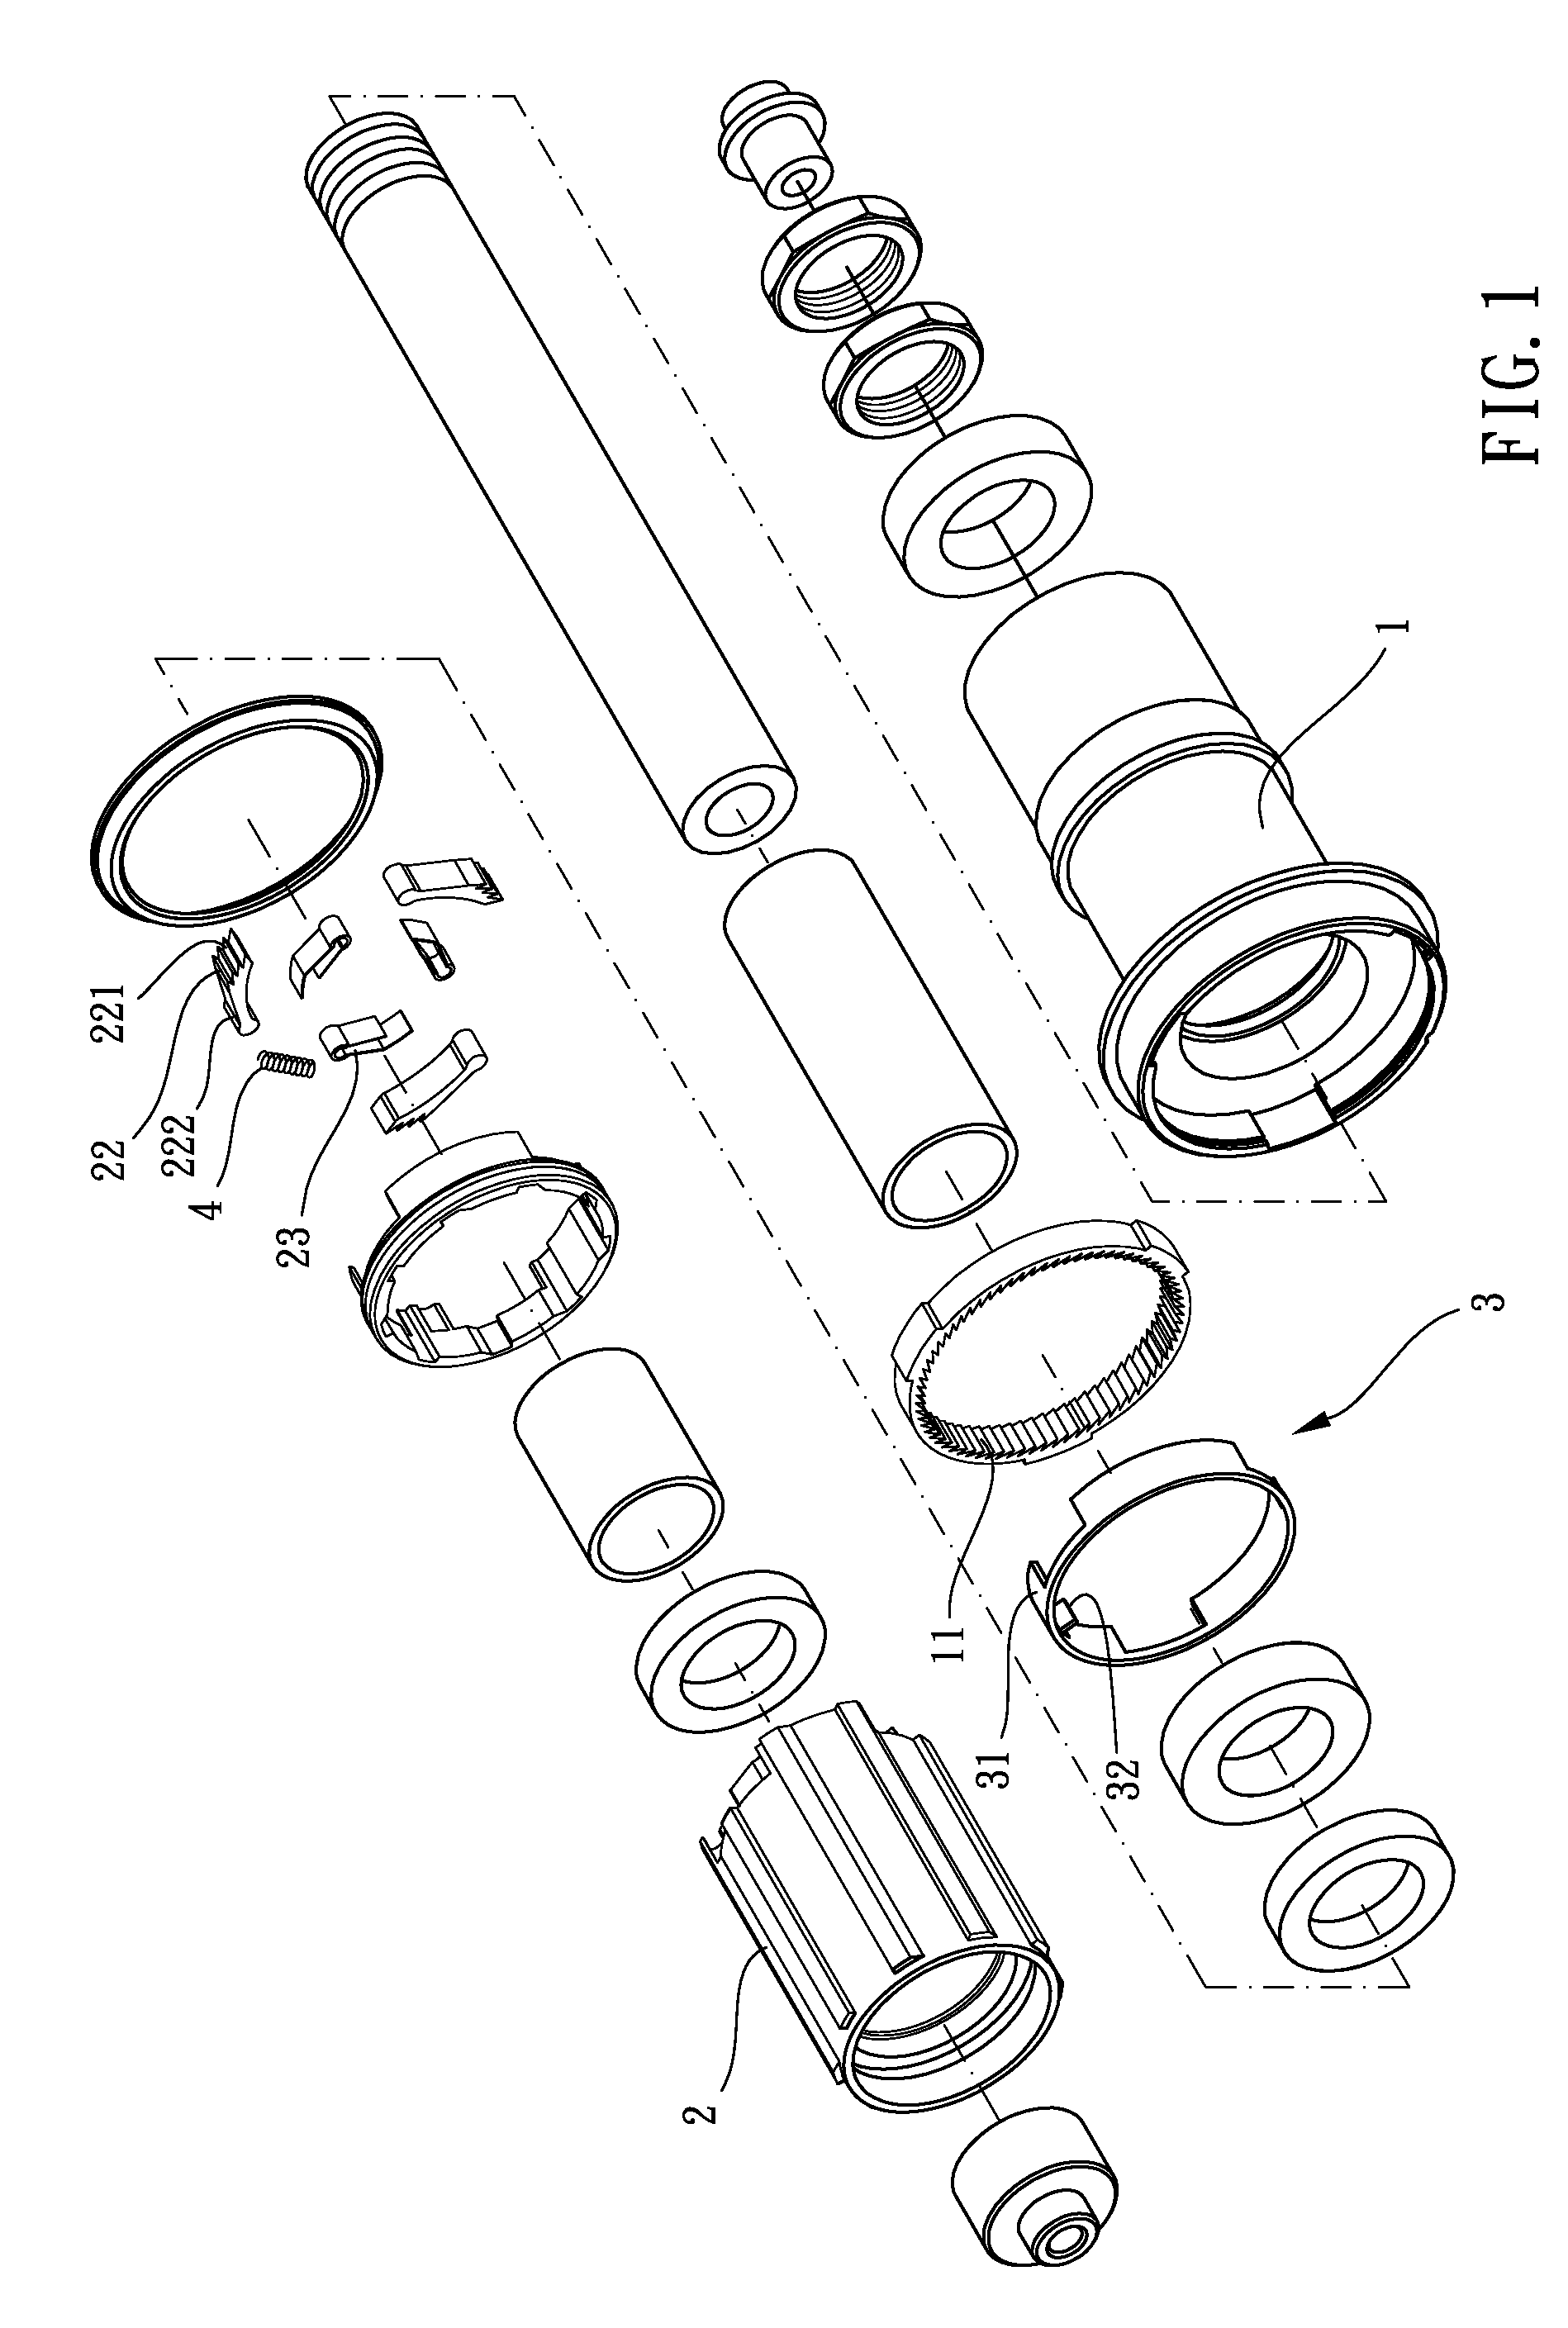 Driving structure for a wheel hub of a bicycle